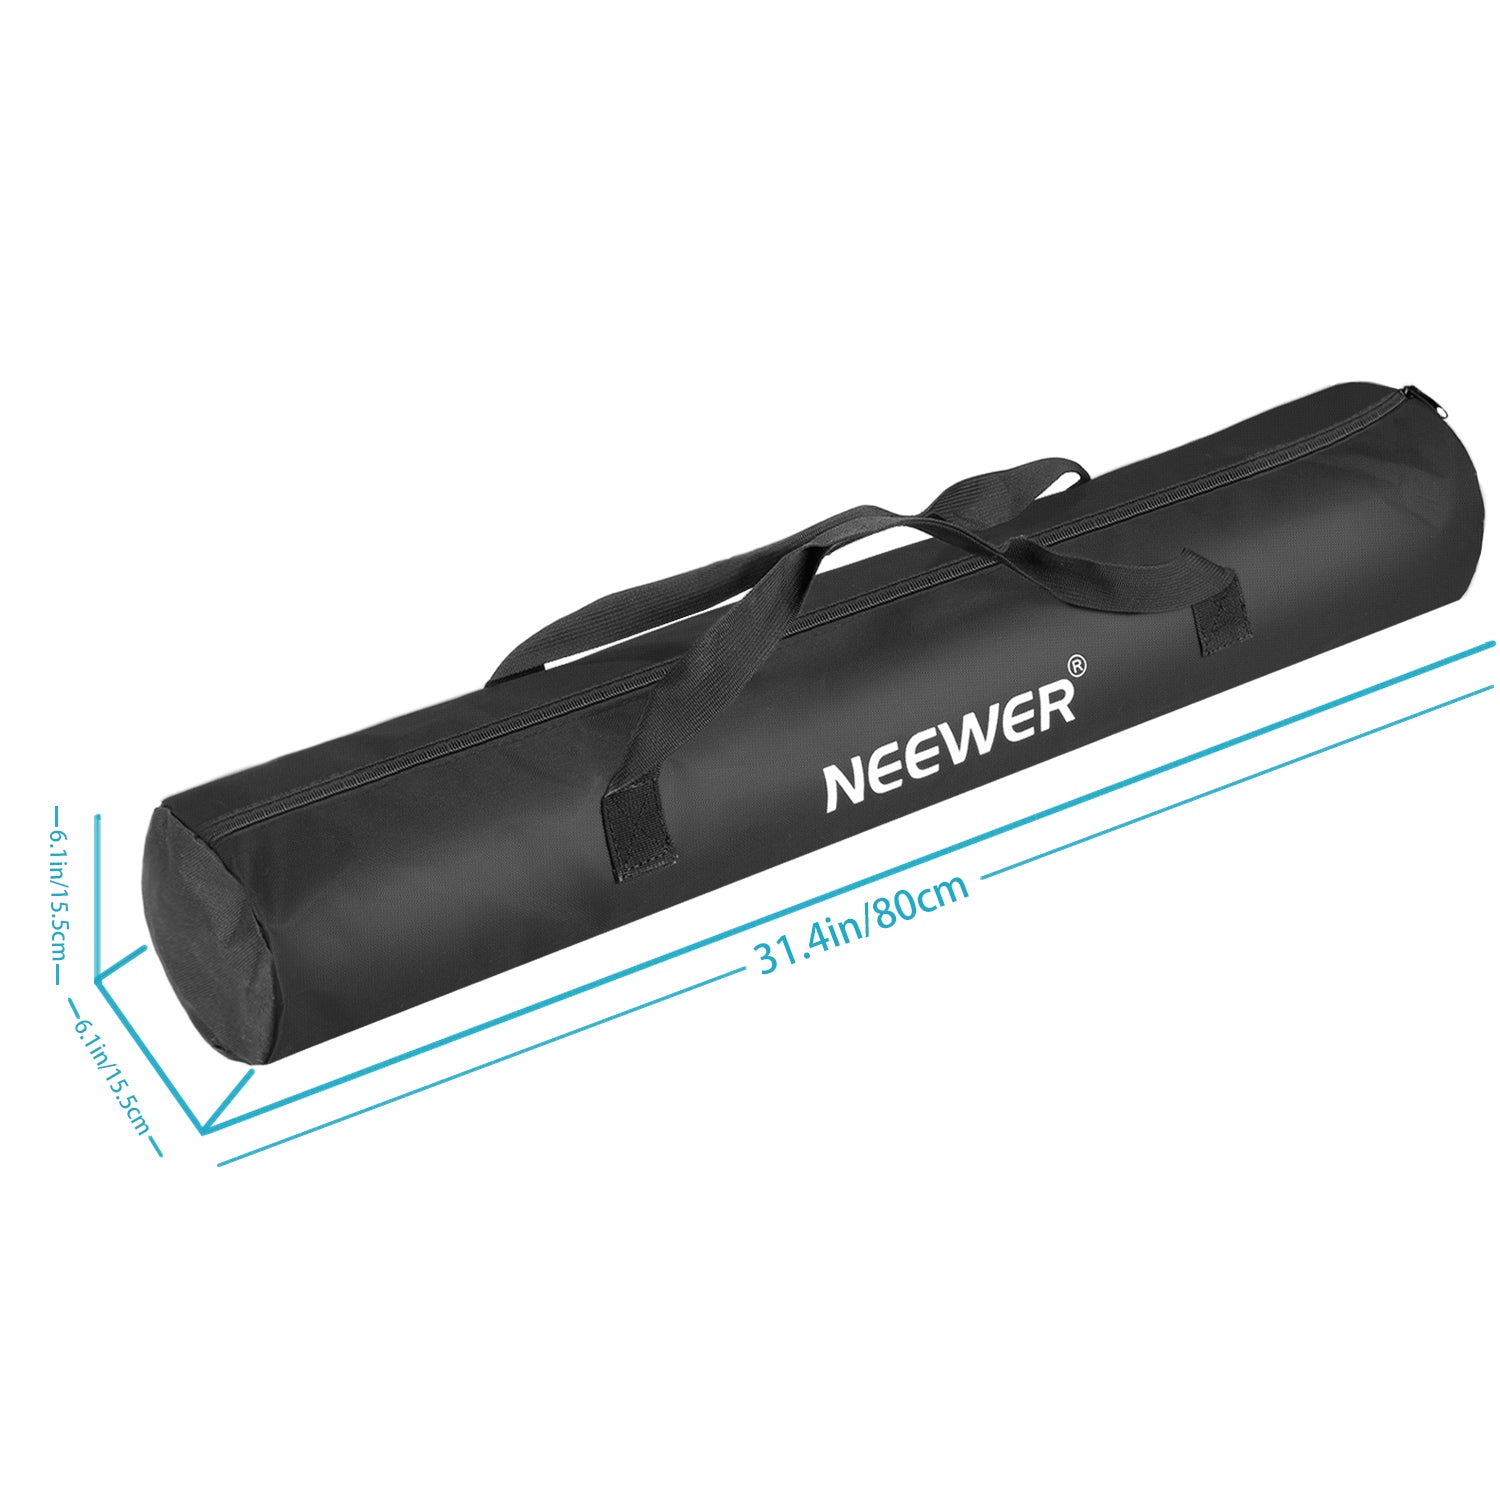 Neewer Photography Light Stand Carrying Bag